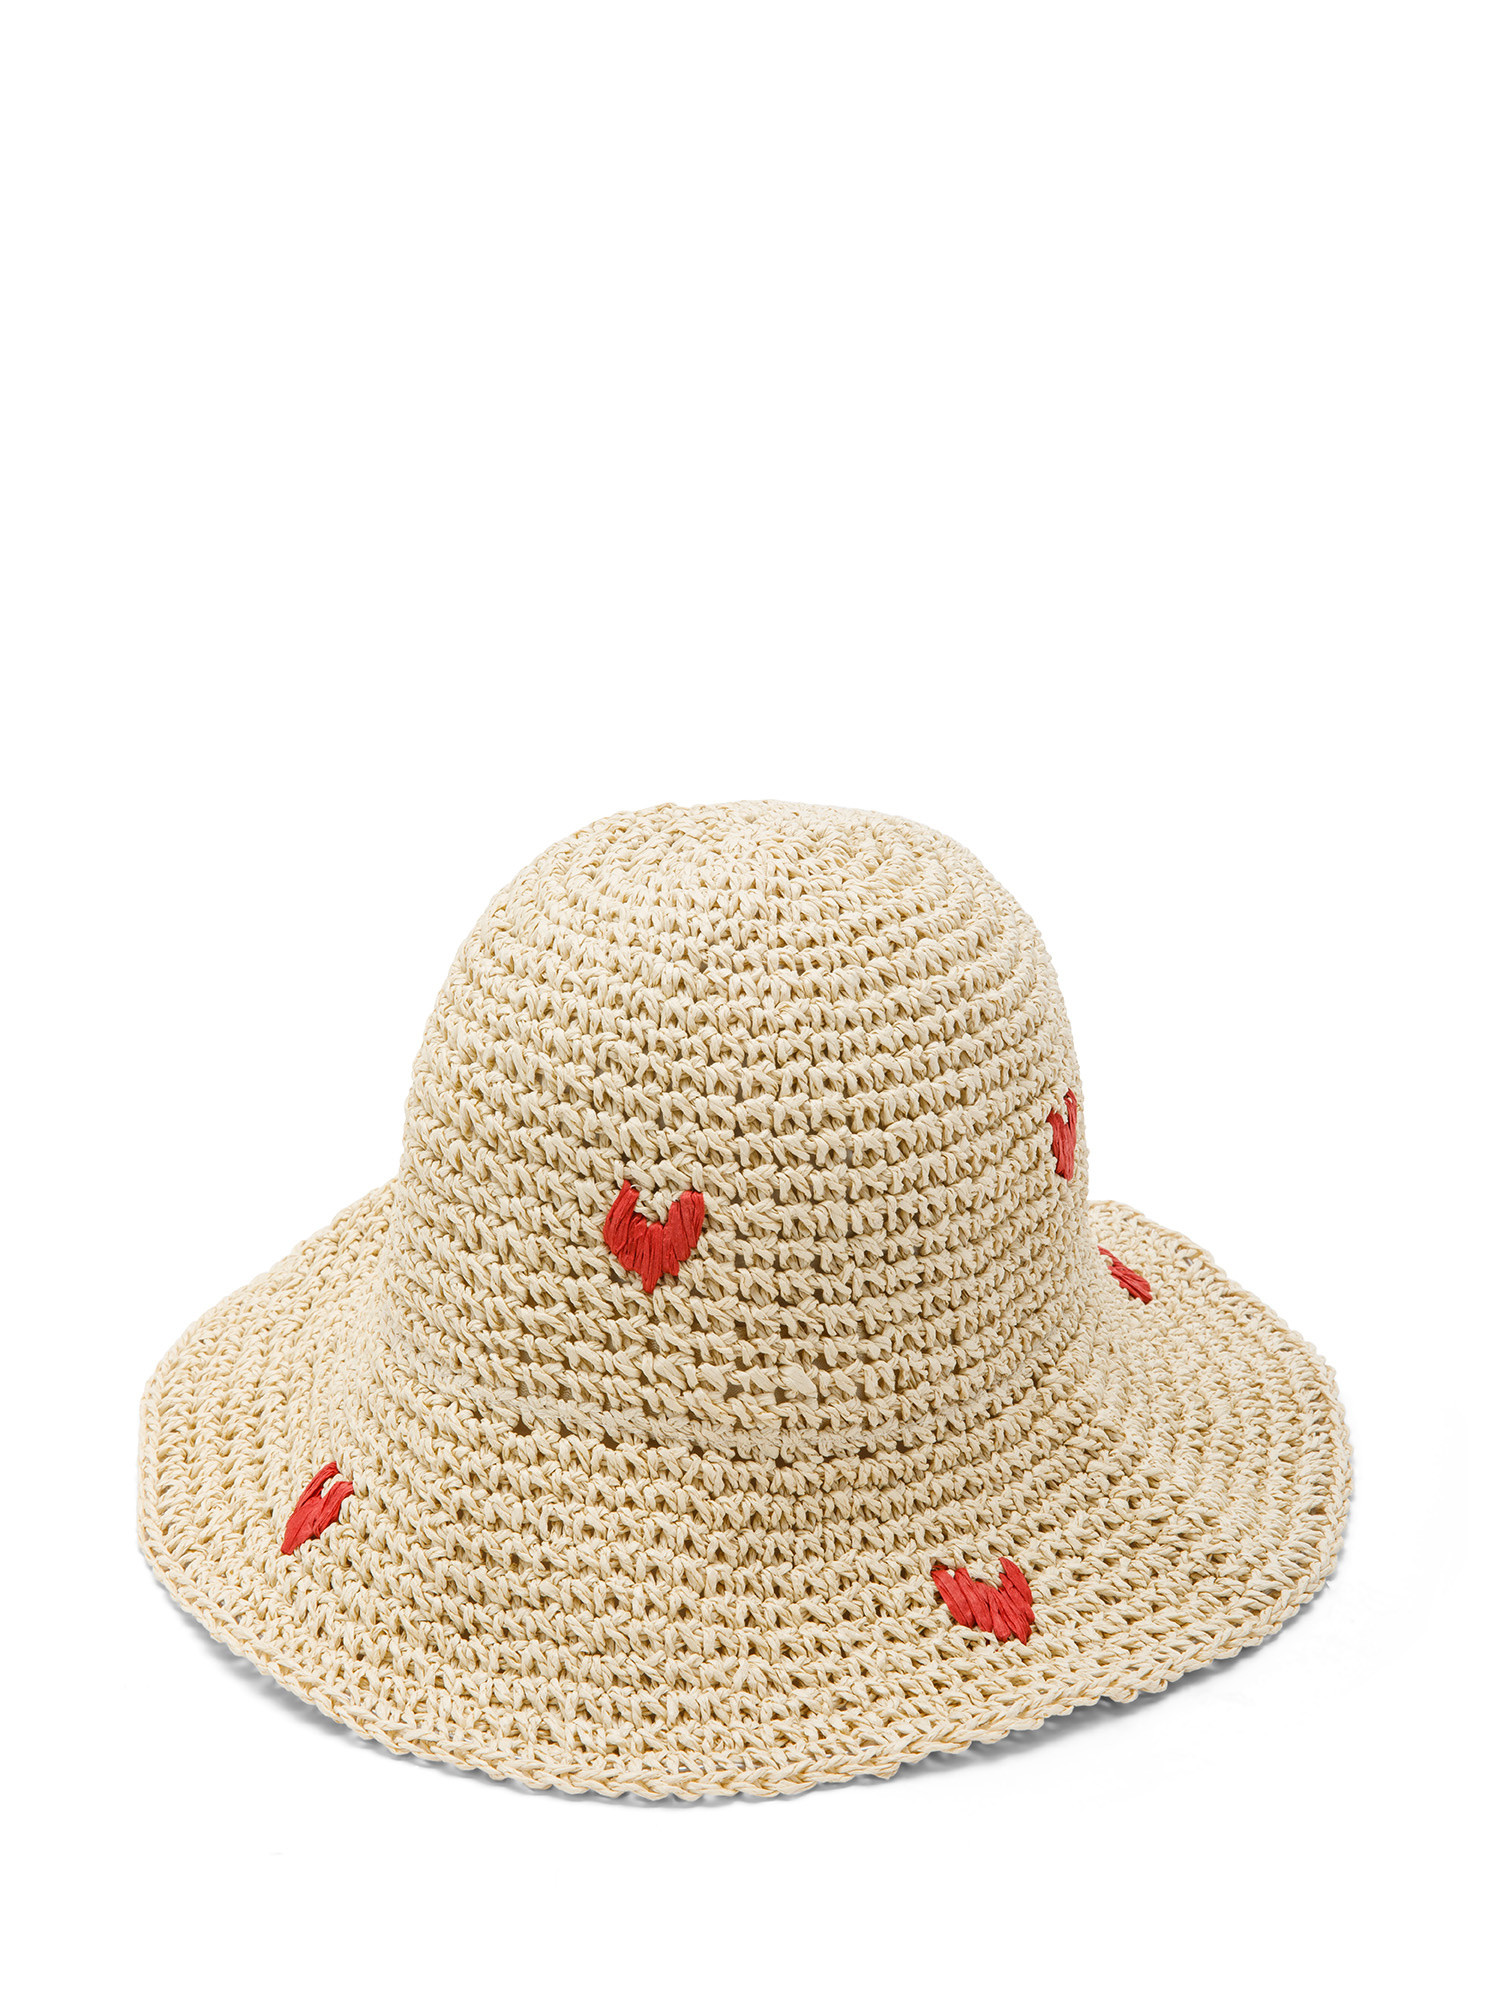 Koan - Hat with embroidery, Natural, large image number 0